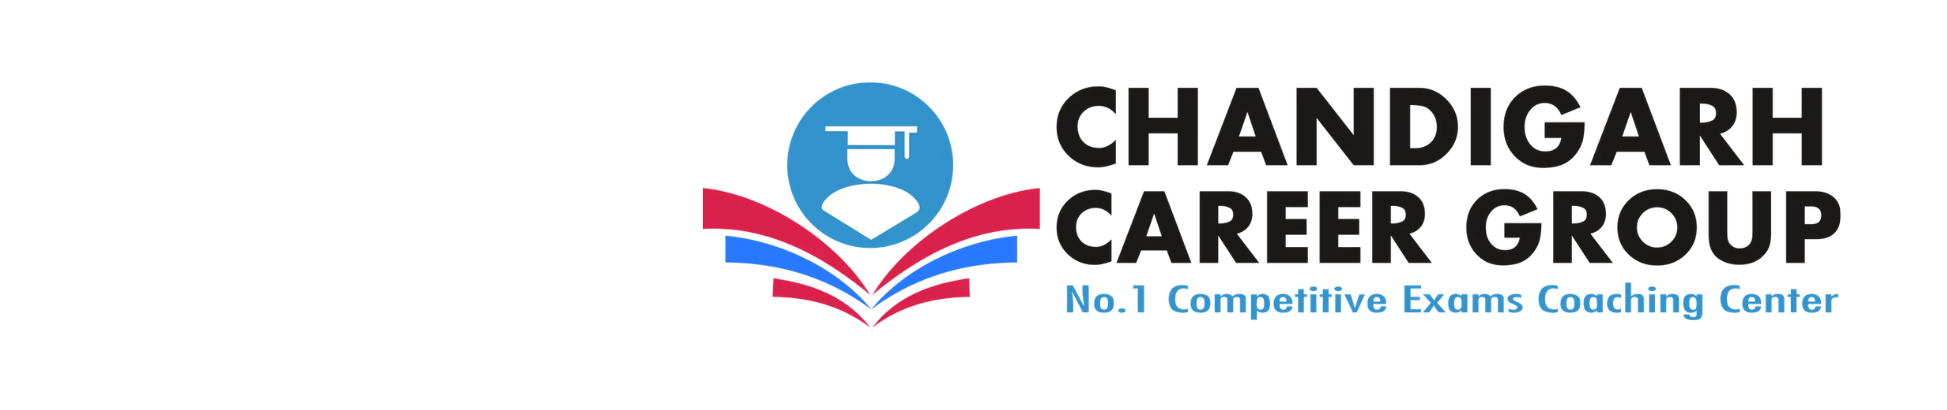 Chandigarh Career Group's profile banner